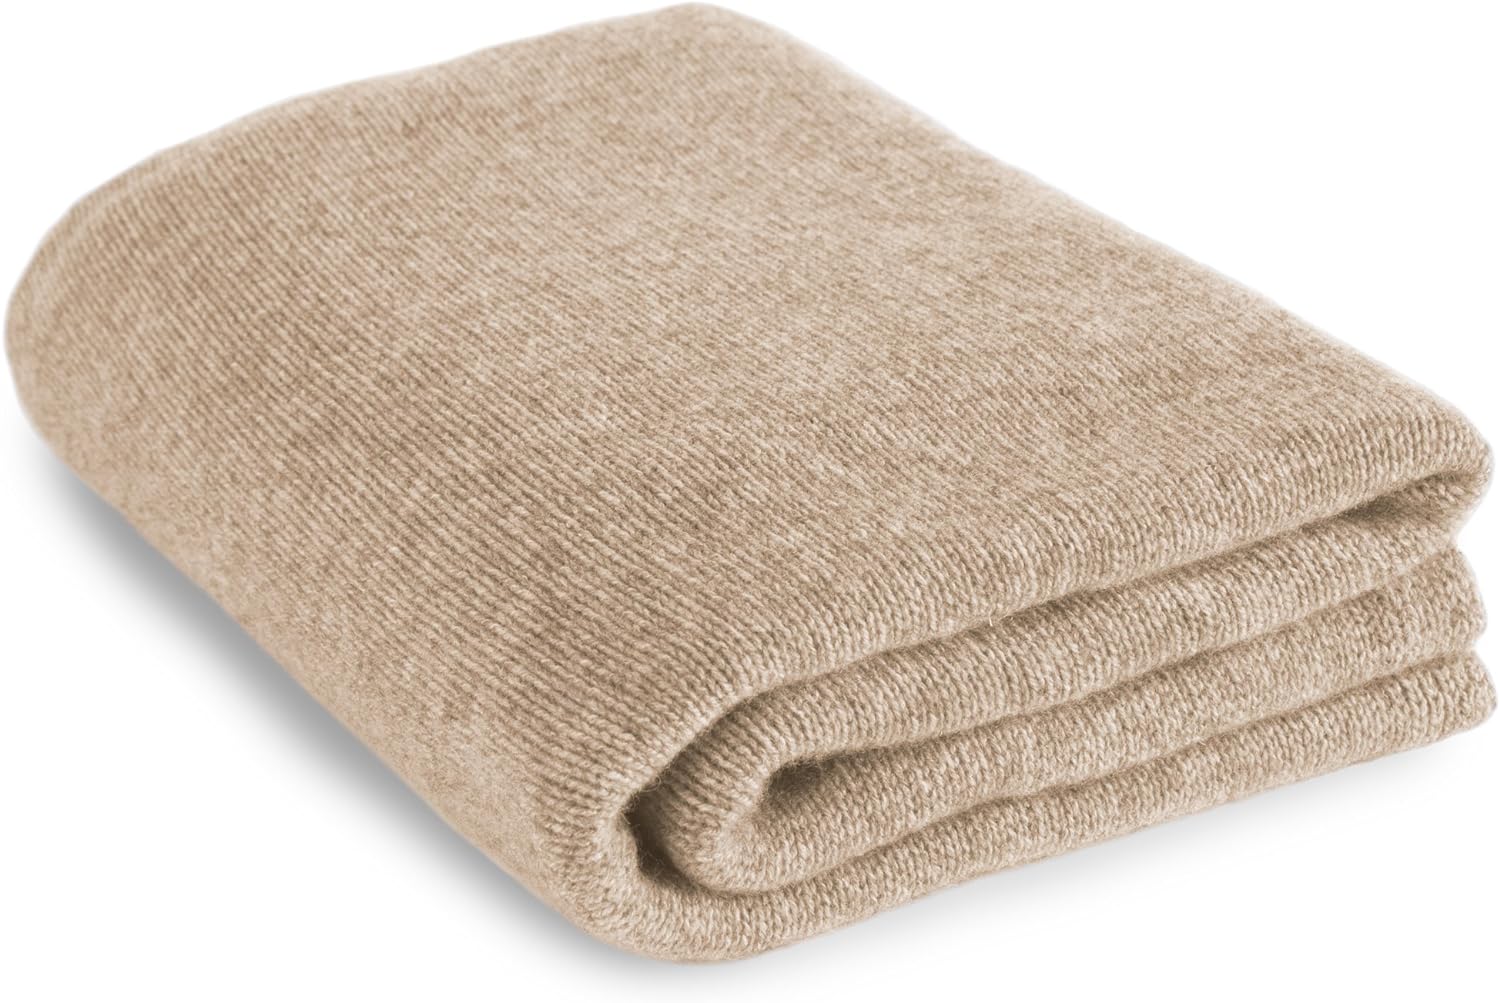 A beige blanket folded on top of a white background.